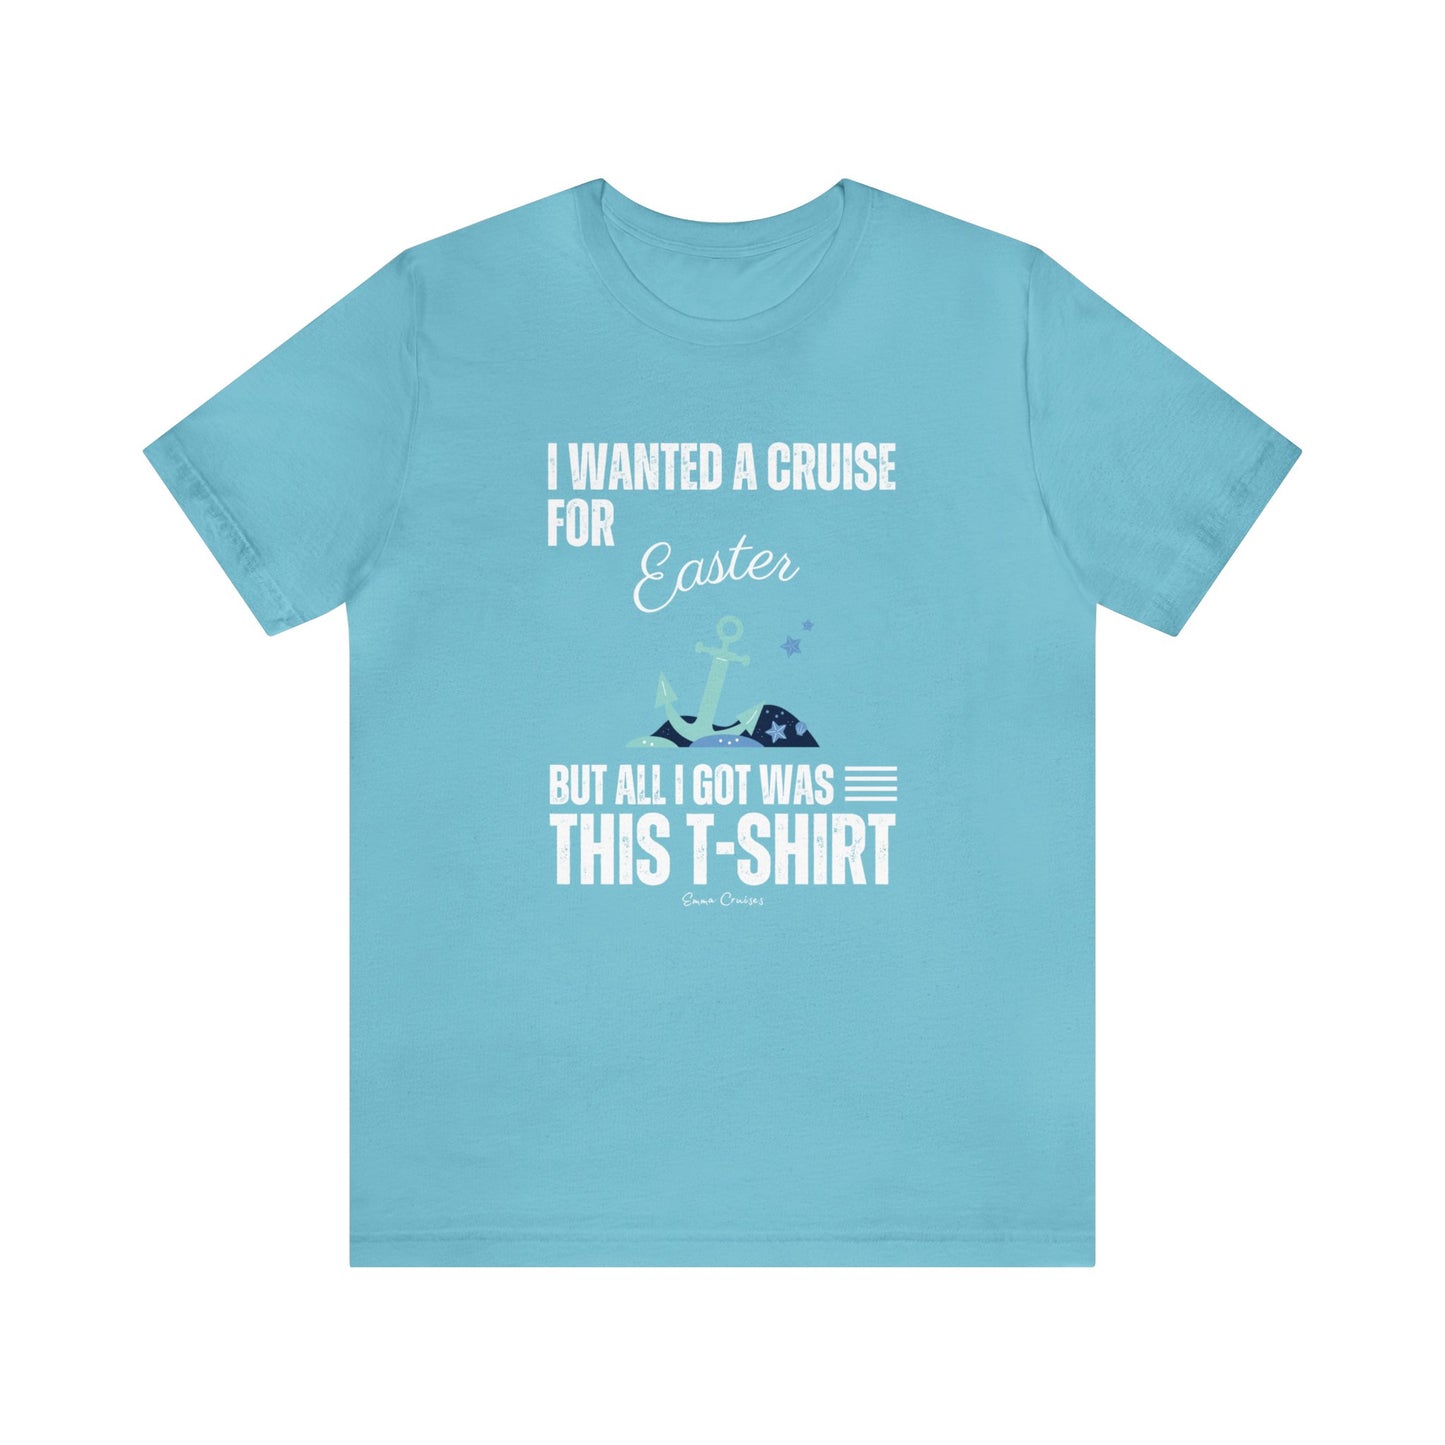 I Wanted a Cruise for Easter - UNISEX T-Shirt